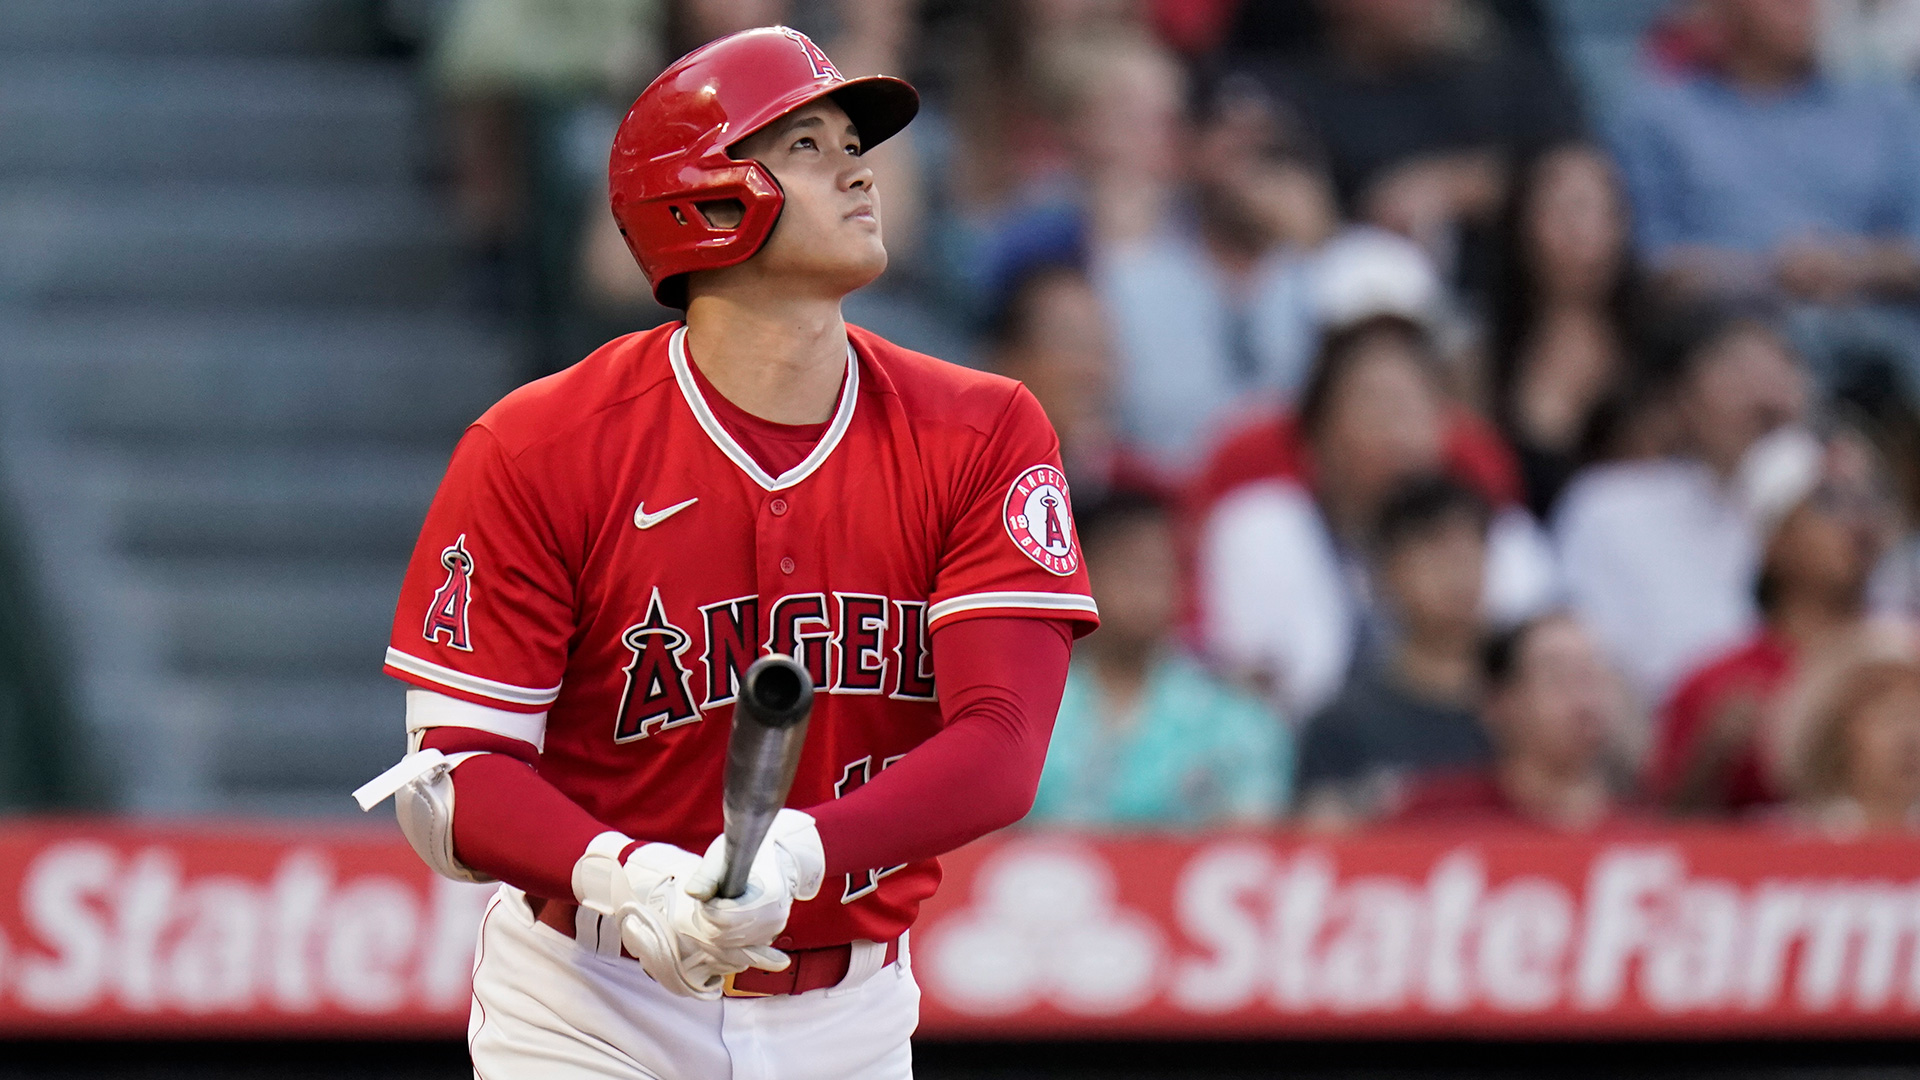 Shohei Ohtani watches a home run just before dropping his bat